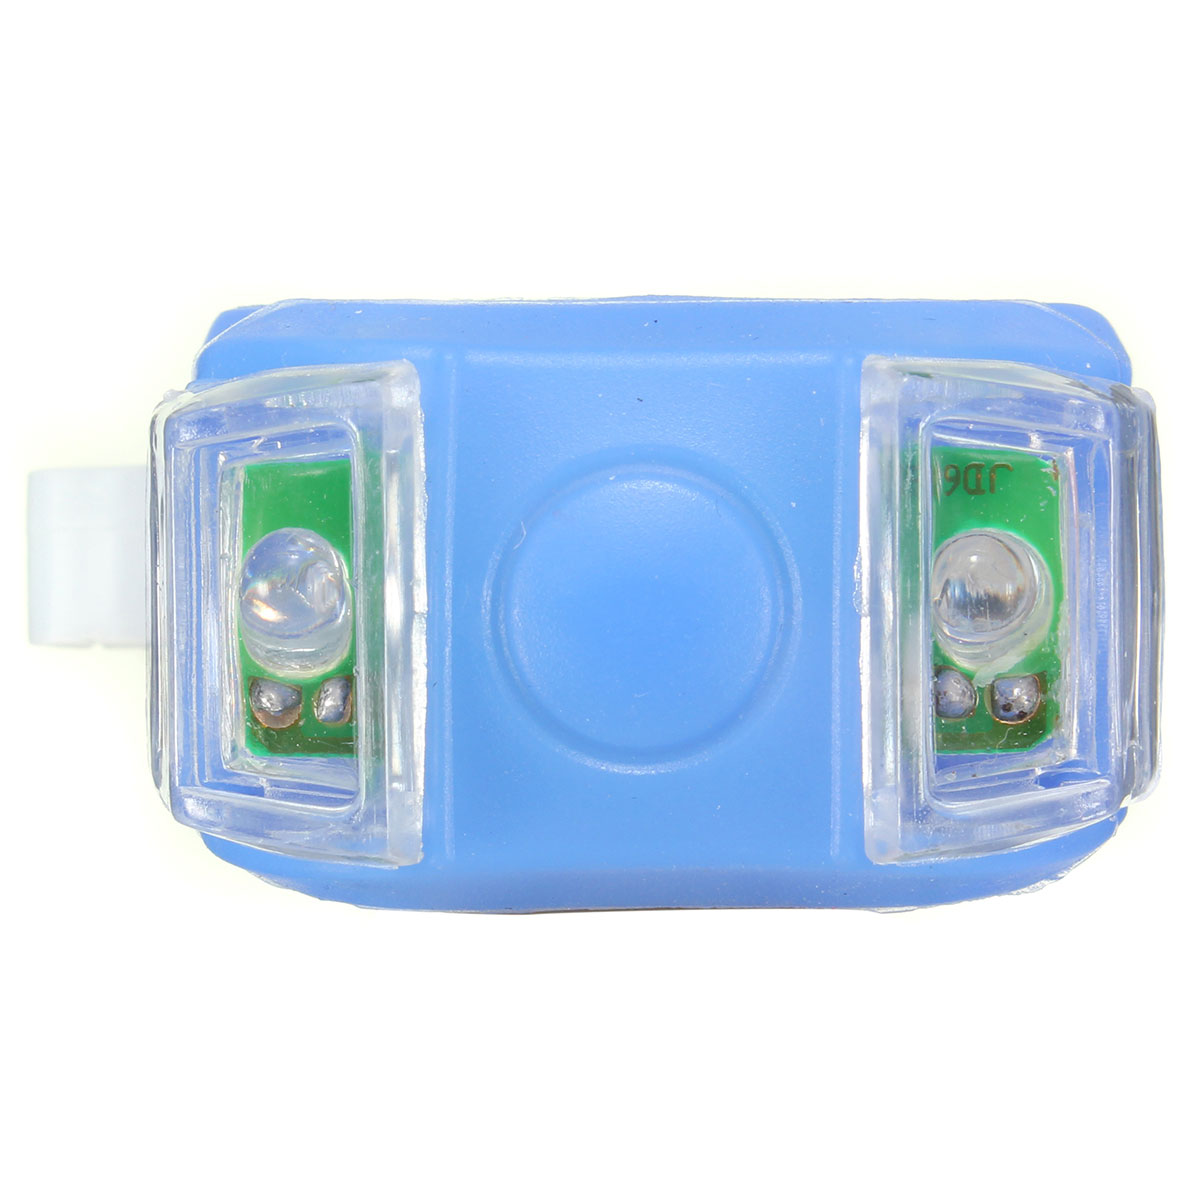 Silicone-Cycling-Front-Rear-Wheel-LED-Flash-Flicker-Frog-Shape-Light-Lamp-1023308